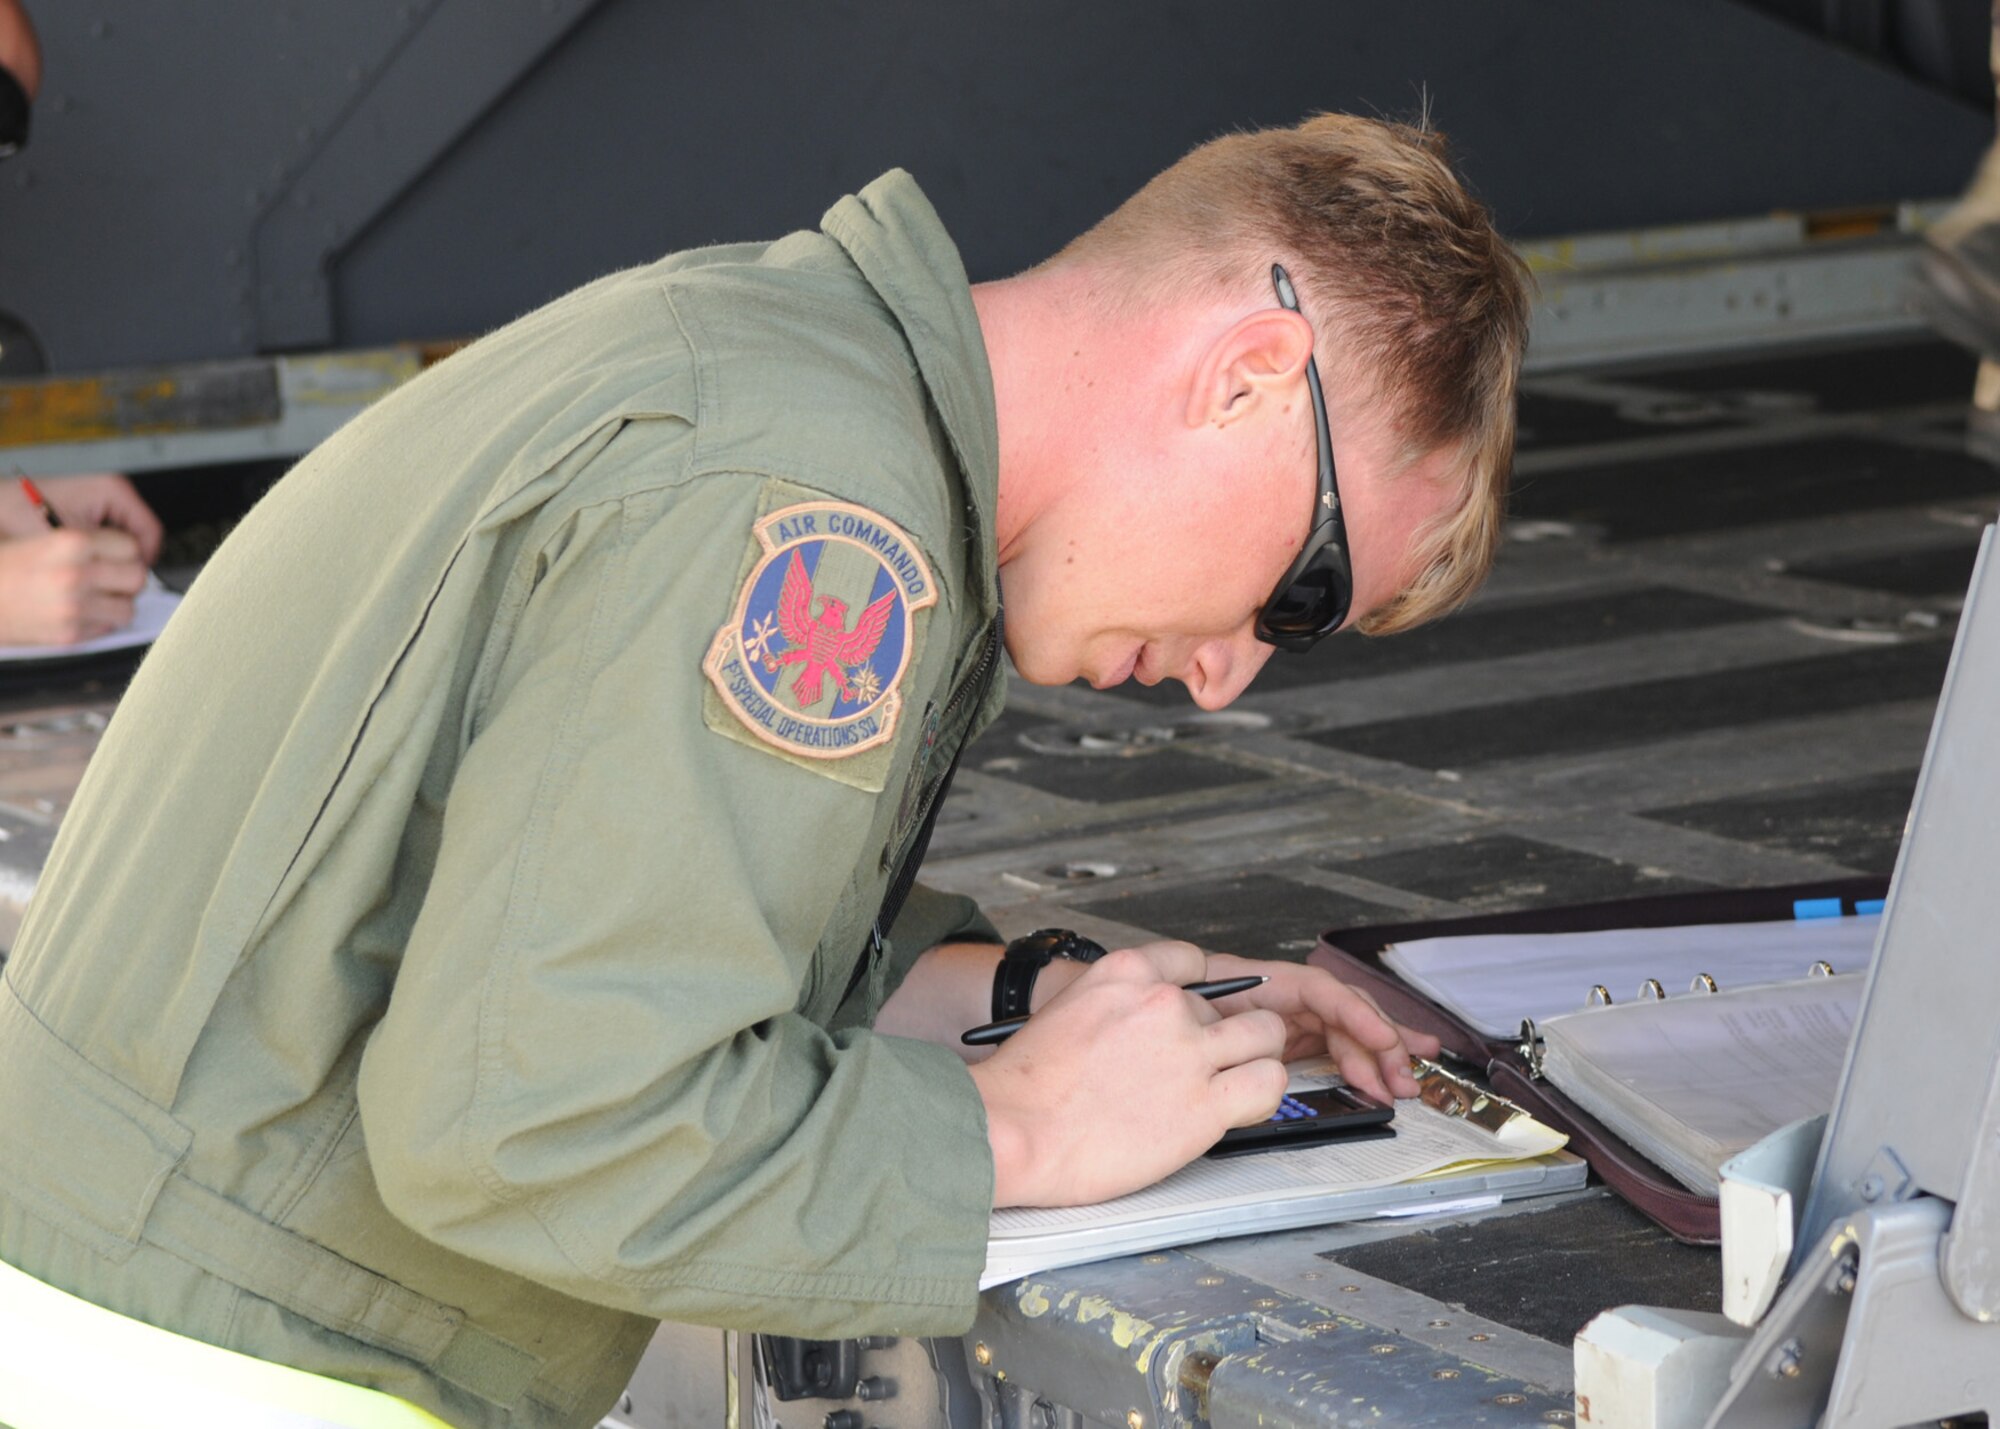 DAEGU AIR BASE, Republic of Korea -- Staff Sgt. James Kosnosky, a 1st Special Operations Squadron loadmaster, completes load plan paperwork before a high altitude, low opening jump here March 19. The training is in preparation for the group's annual operational readiness exercise which affords unit members an opportunity to practice wartime skills necessary for their ability to survive and operate. The 353rd Special Operations Group is the focal point for all U.S. Air Force special operations activities throughout the U.S. Pacific Command theater. (U.S. Air Force photo by Tech. Sgt. Aaron Cram)
